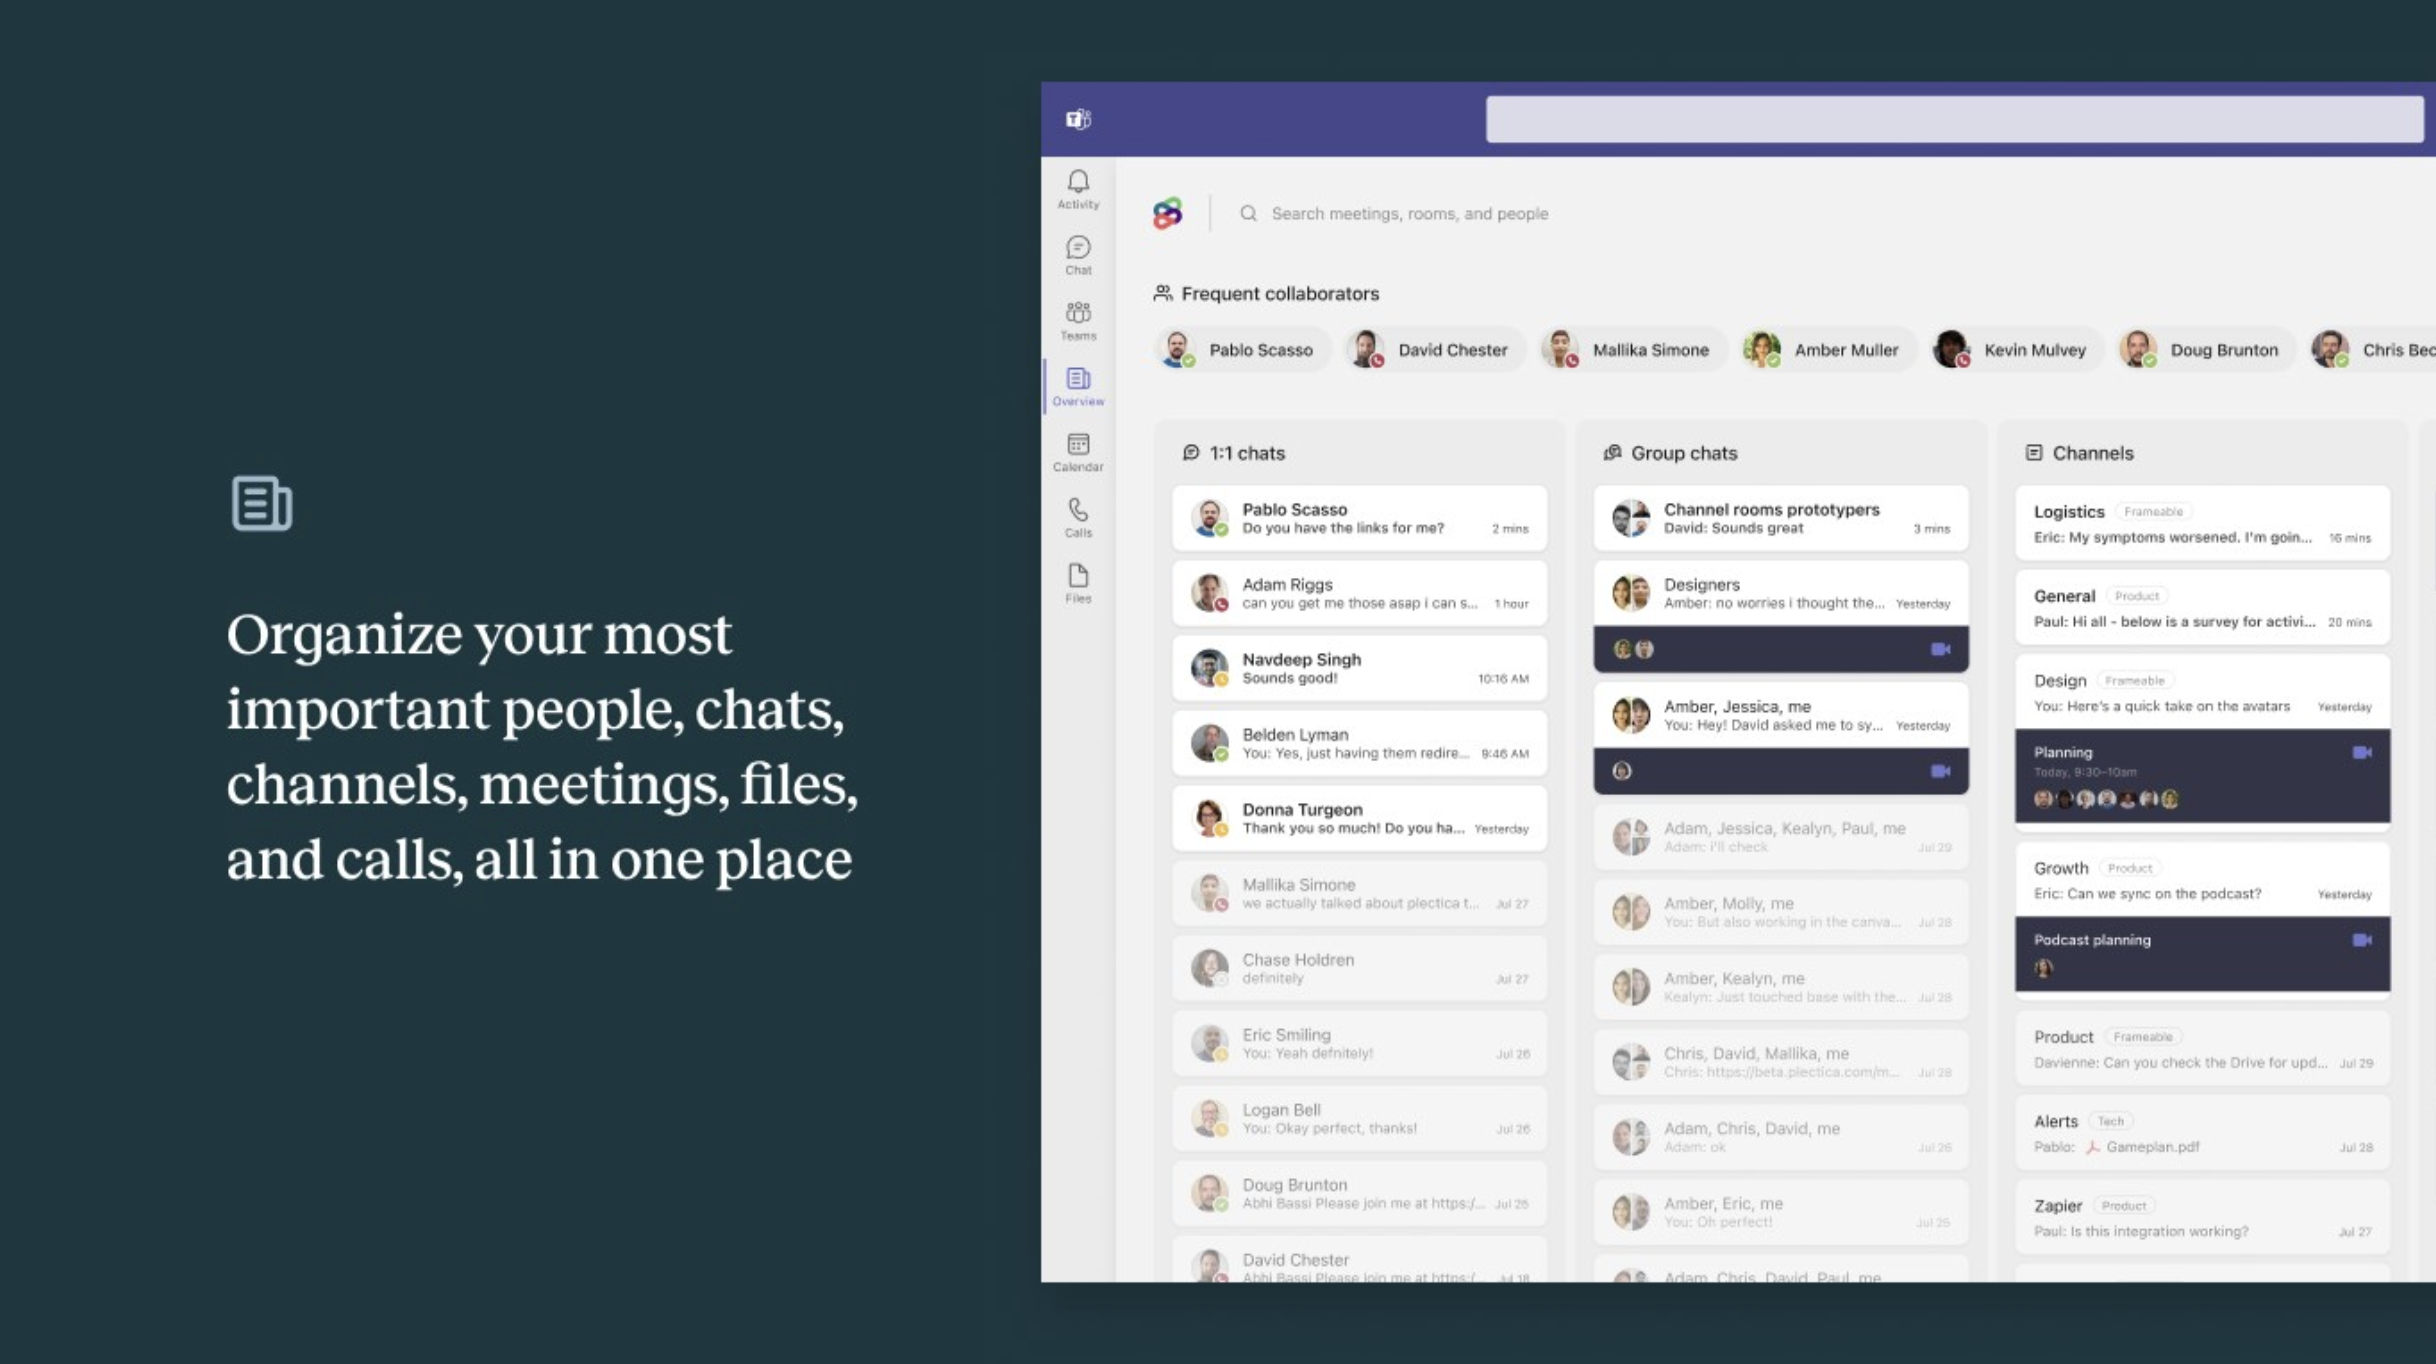 Organize your most important chats, people, channels and meeting in one location